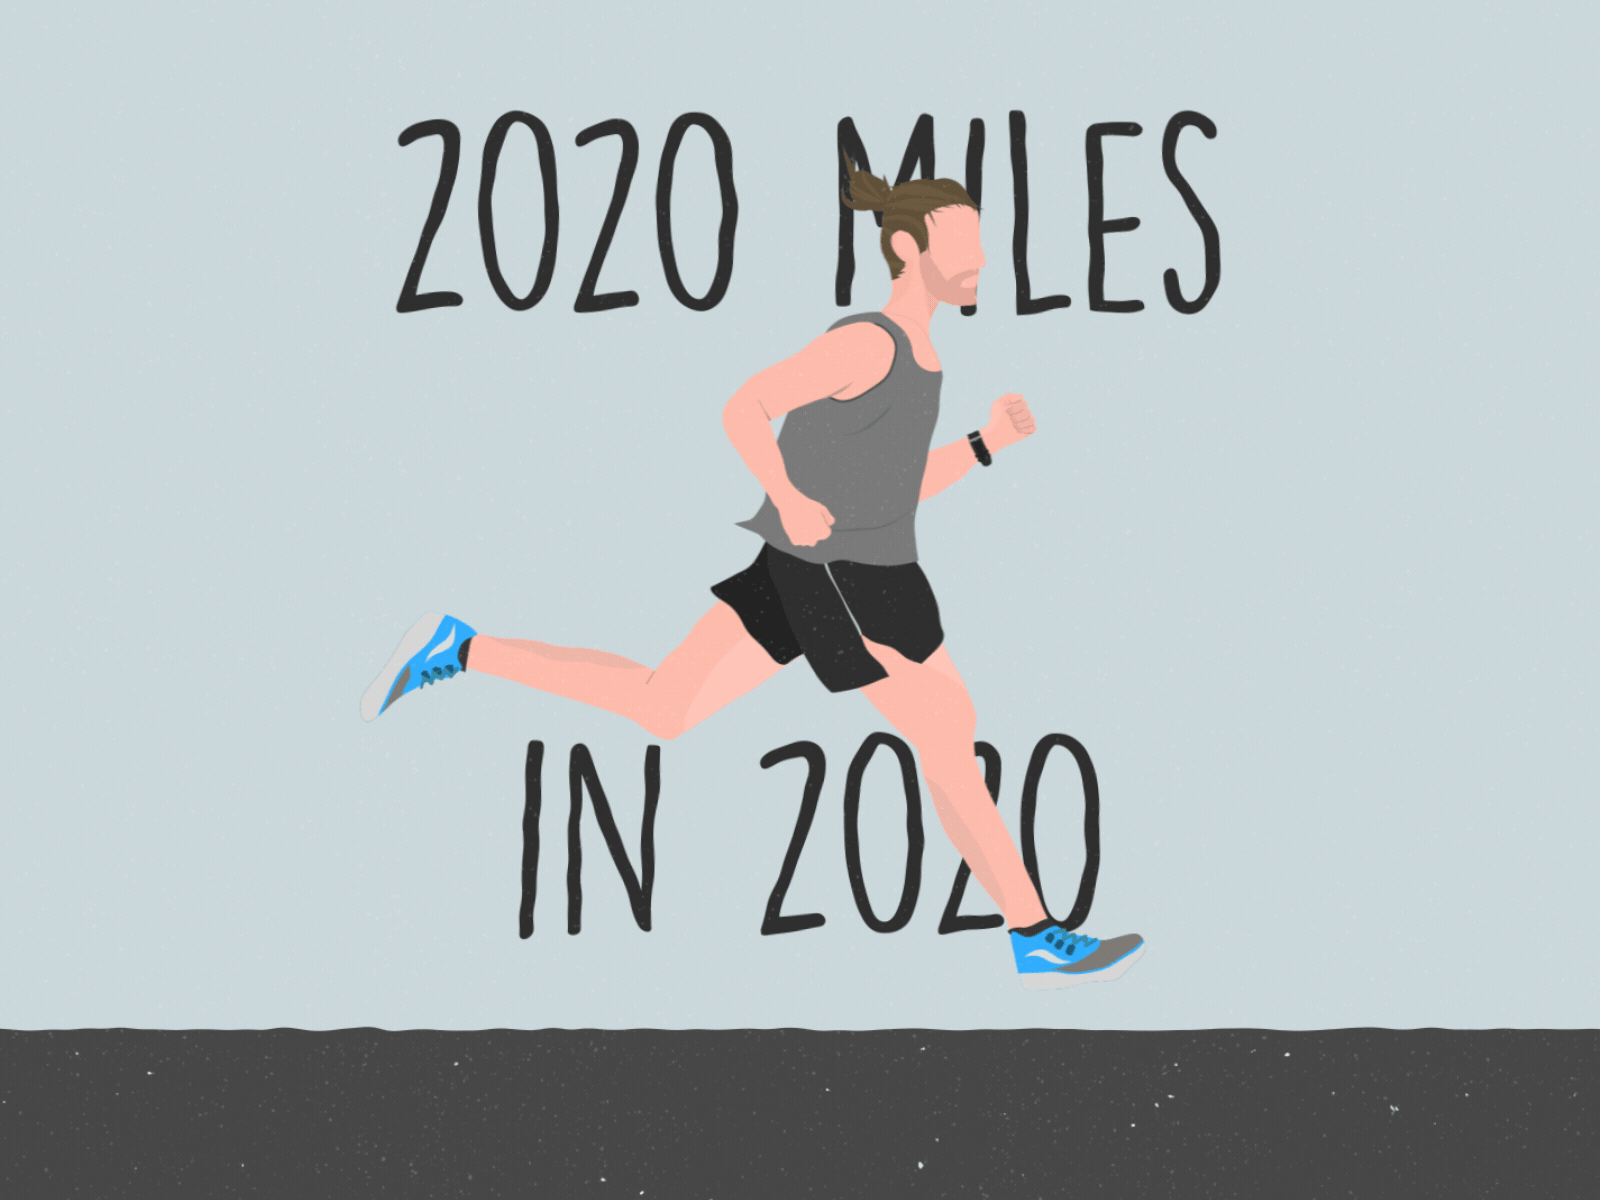 Run Cycle - 2020 miles in 2020 2d 2danimation after effects animation looped looping animation loops run cycle